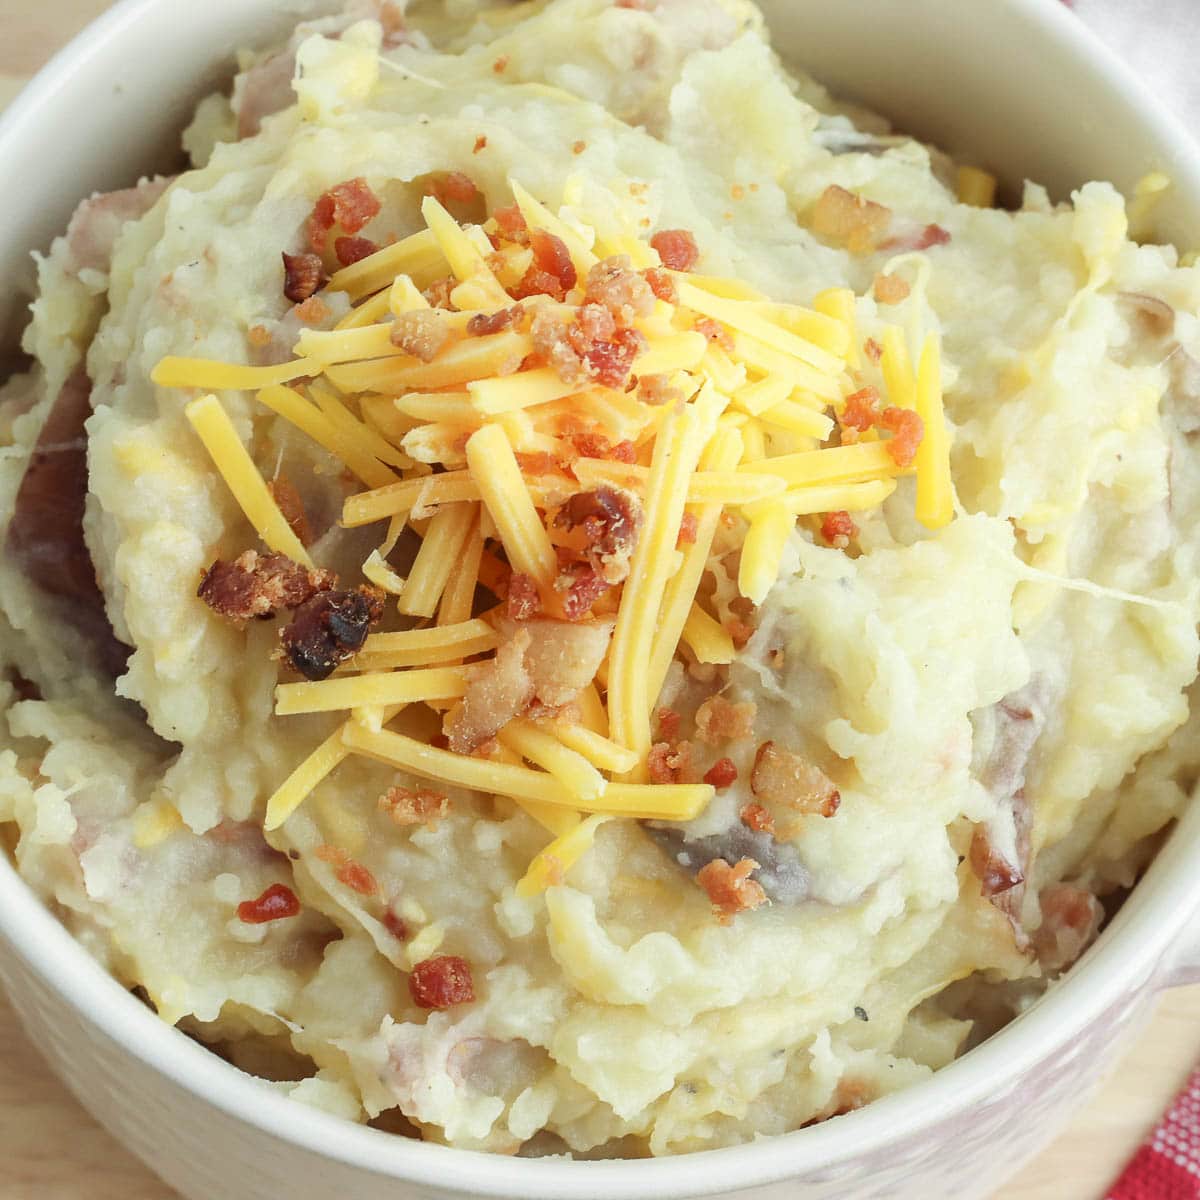 A bowl of mashed potatoes with bacon and cheese.